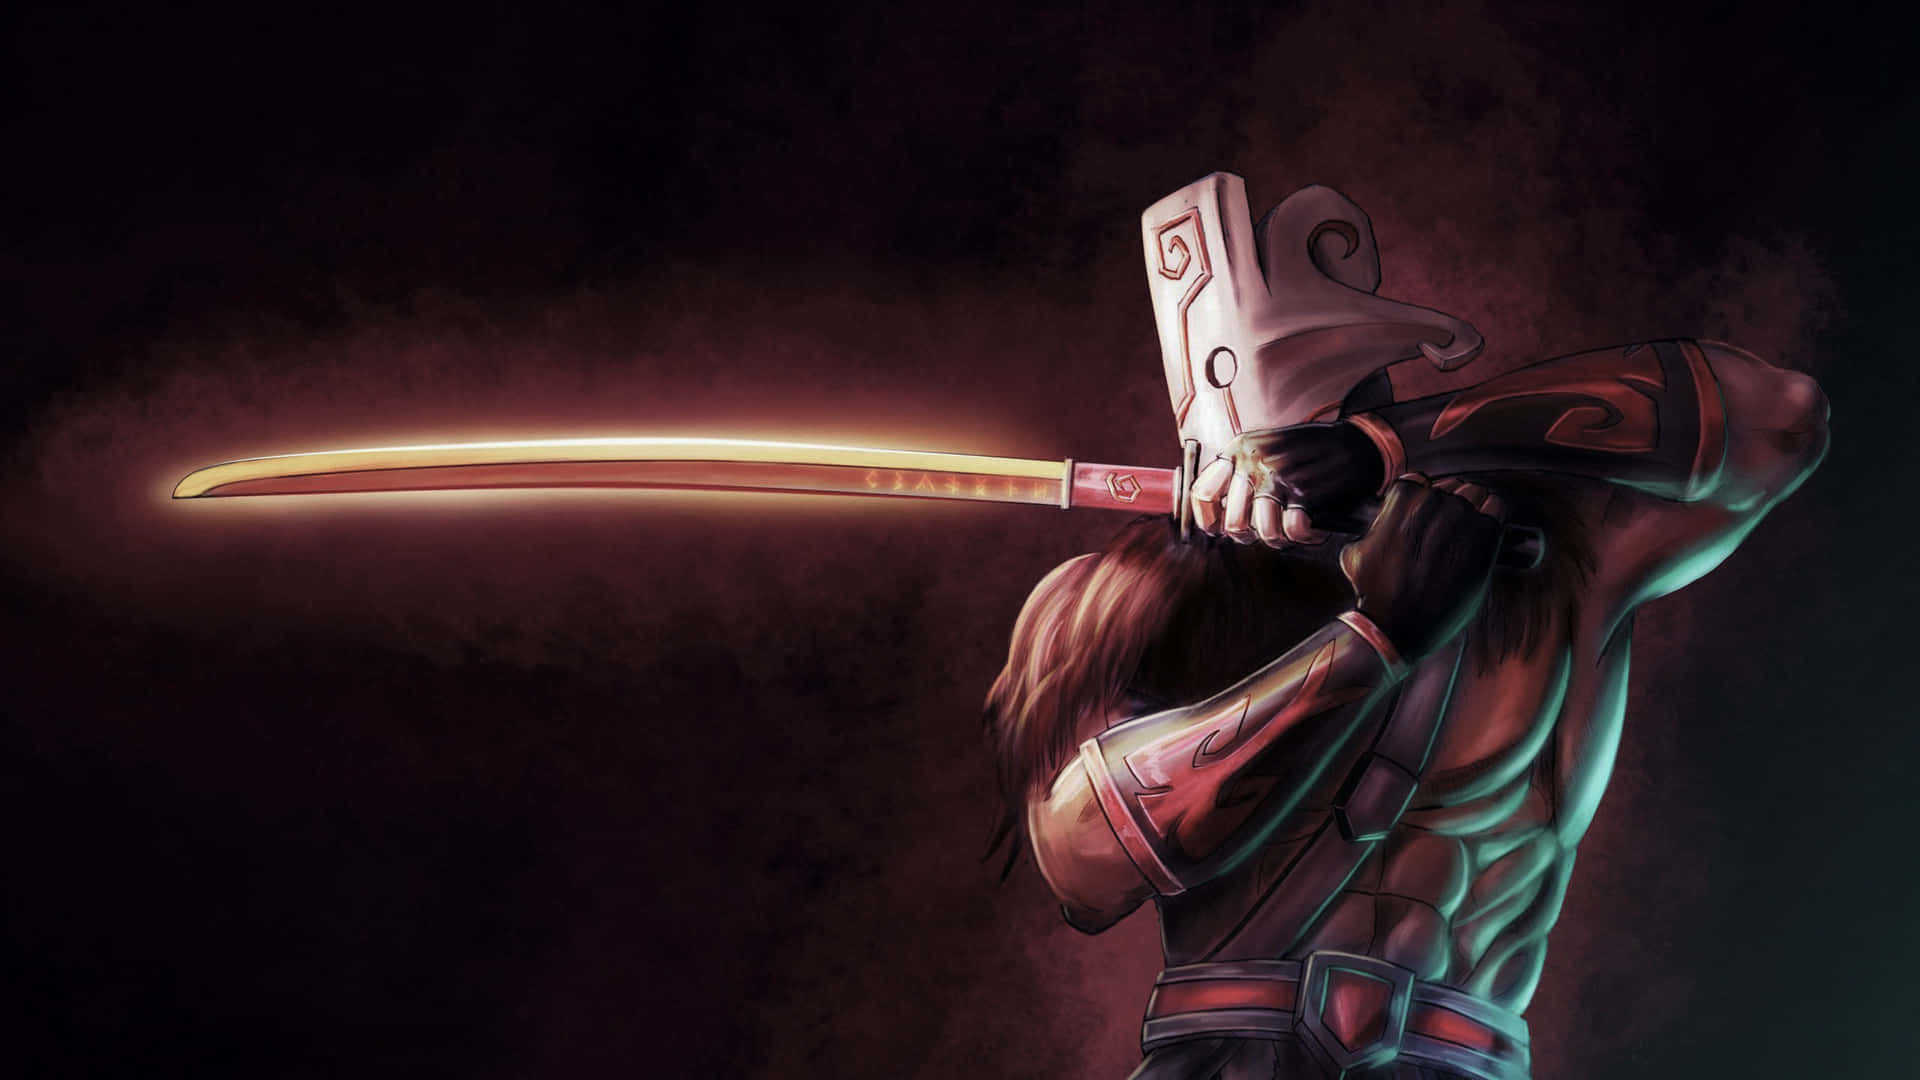 Outplay the Enemy with Dota 2's Juggernaut Wallpaper